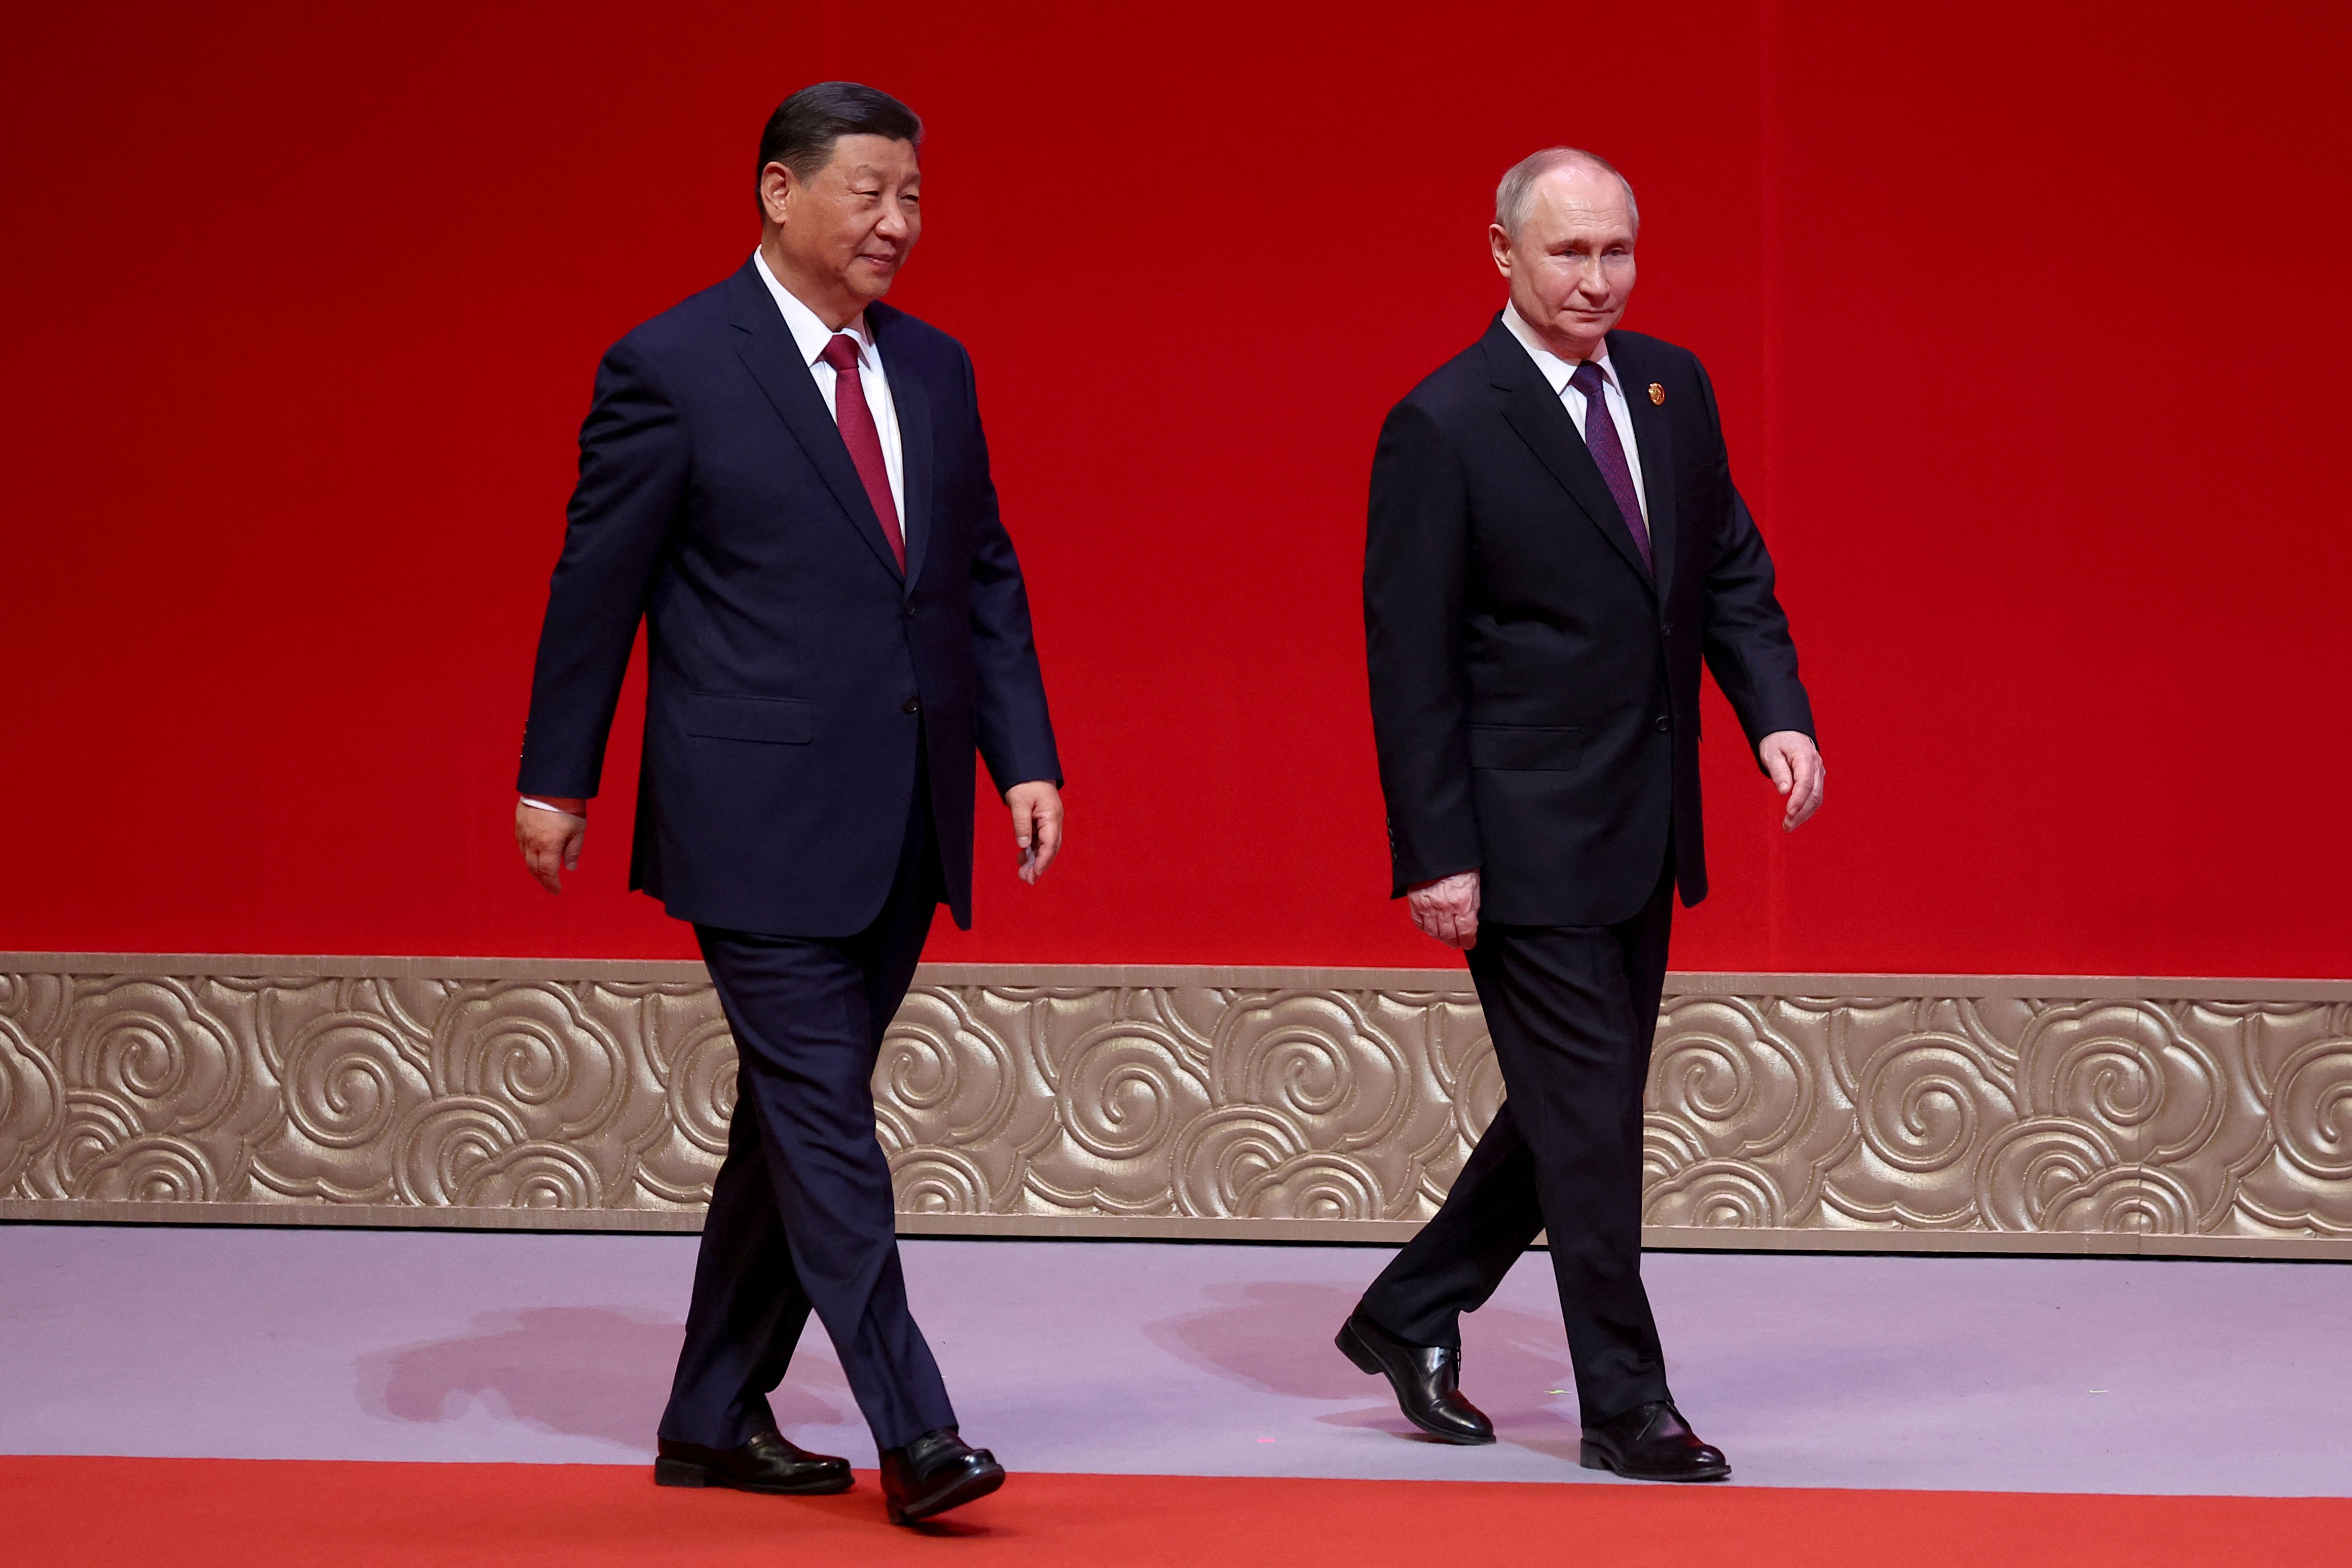 Vladimir Putin and Xi Jinping agreed to deepend their ties following talks in Beijing on Thursday